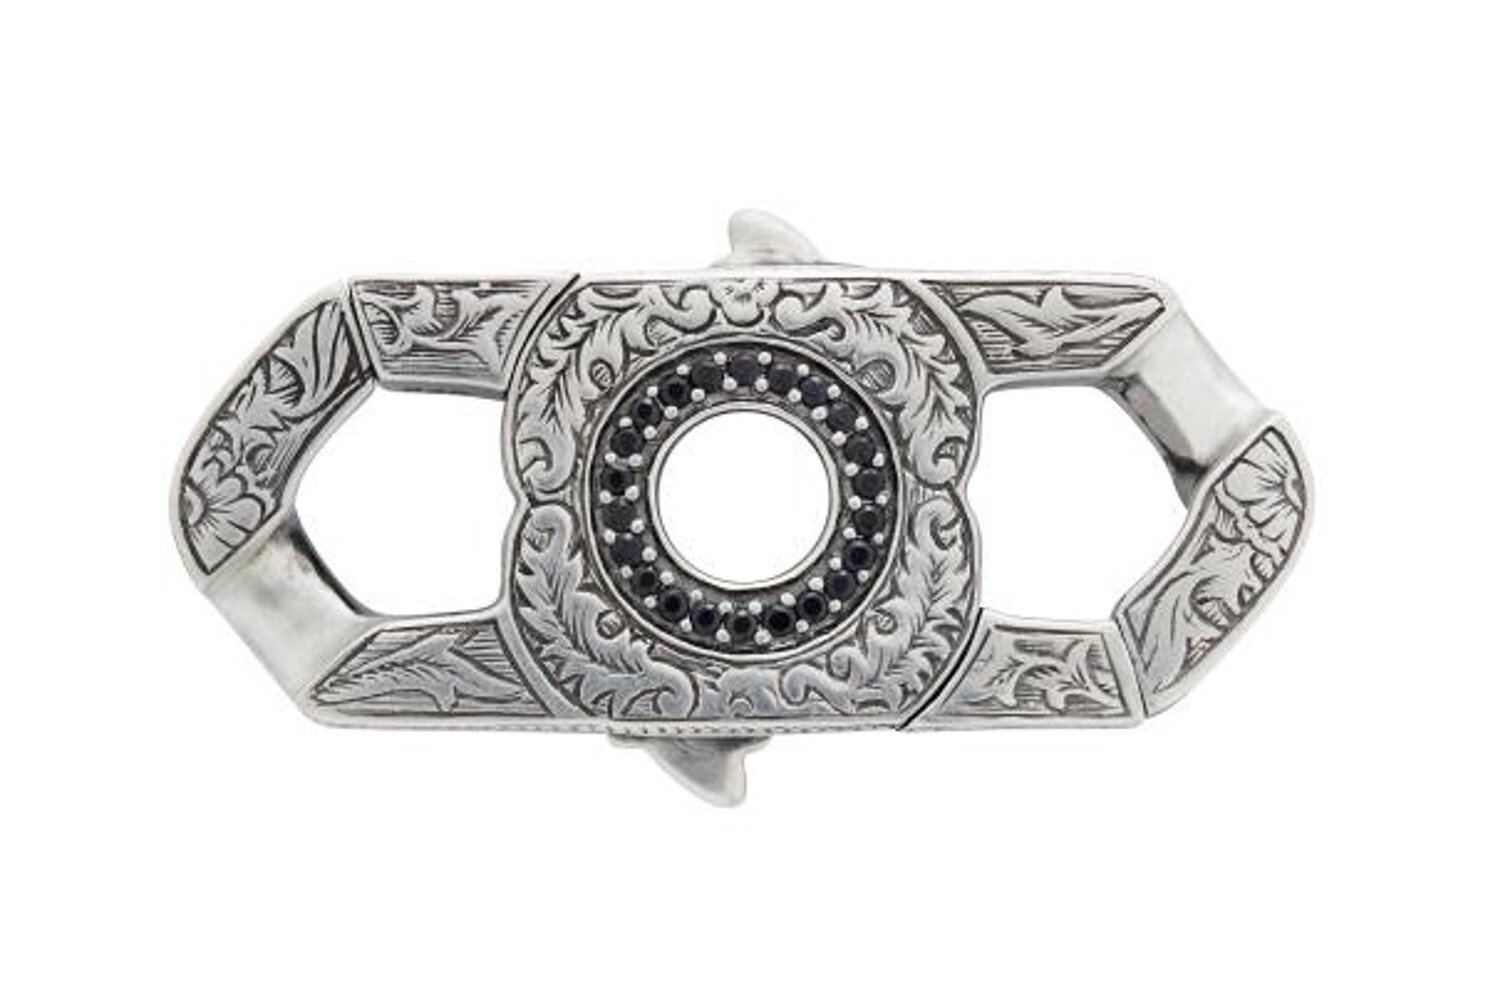 England Made Me Half Revolutionary Bracelet Clasp with Black Mother of Pearl and Black Diamonds in Gunmetal Sterling Silver - 18mm